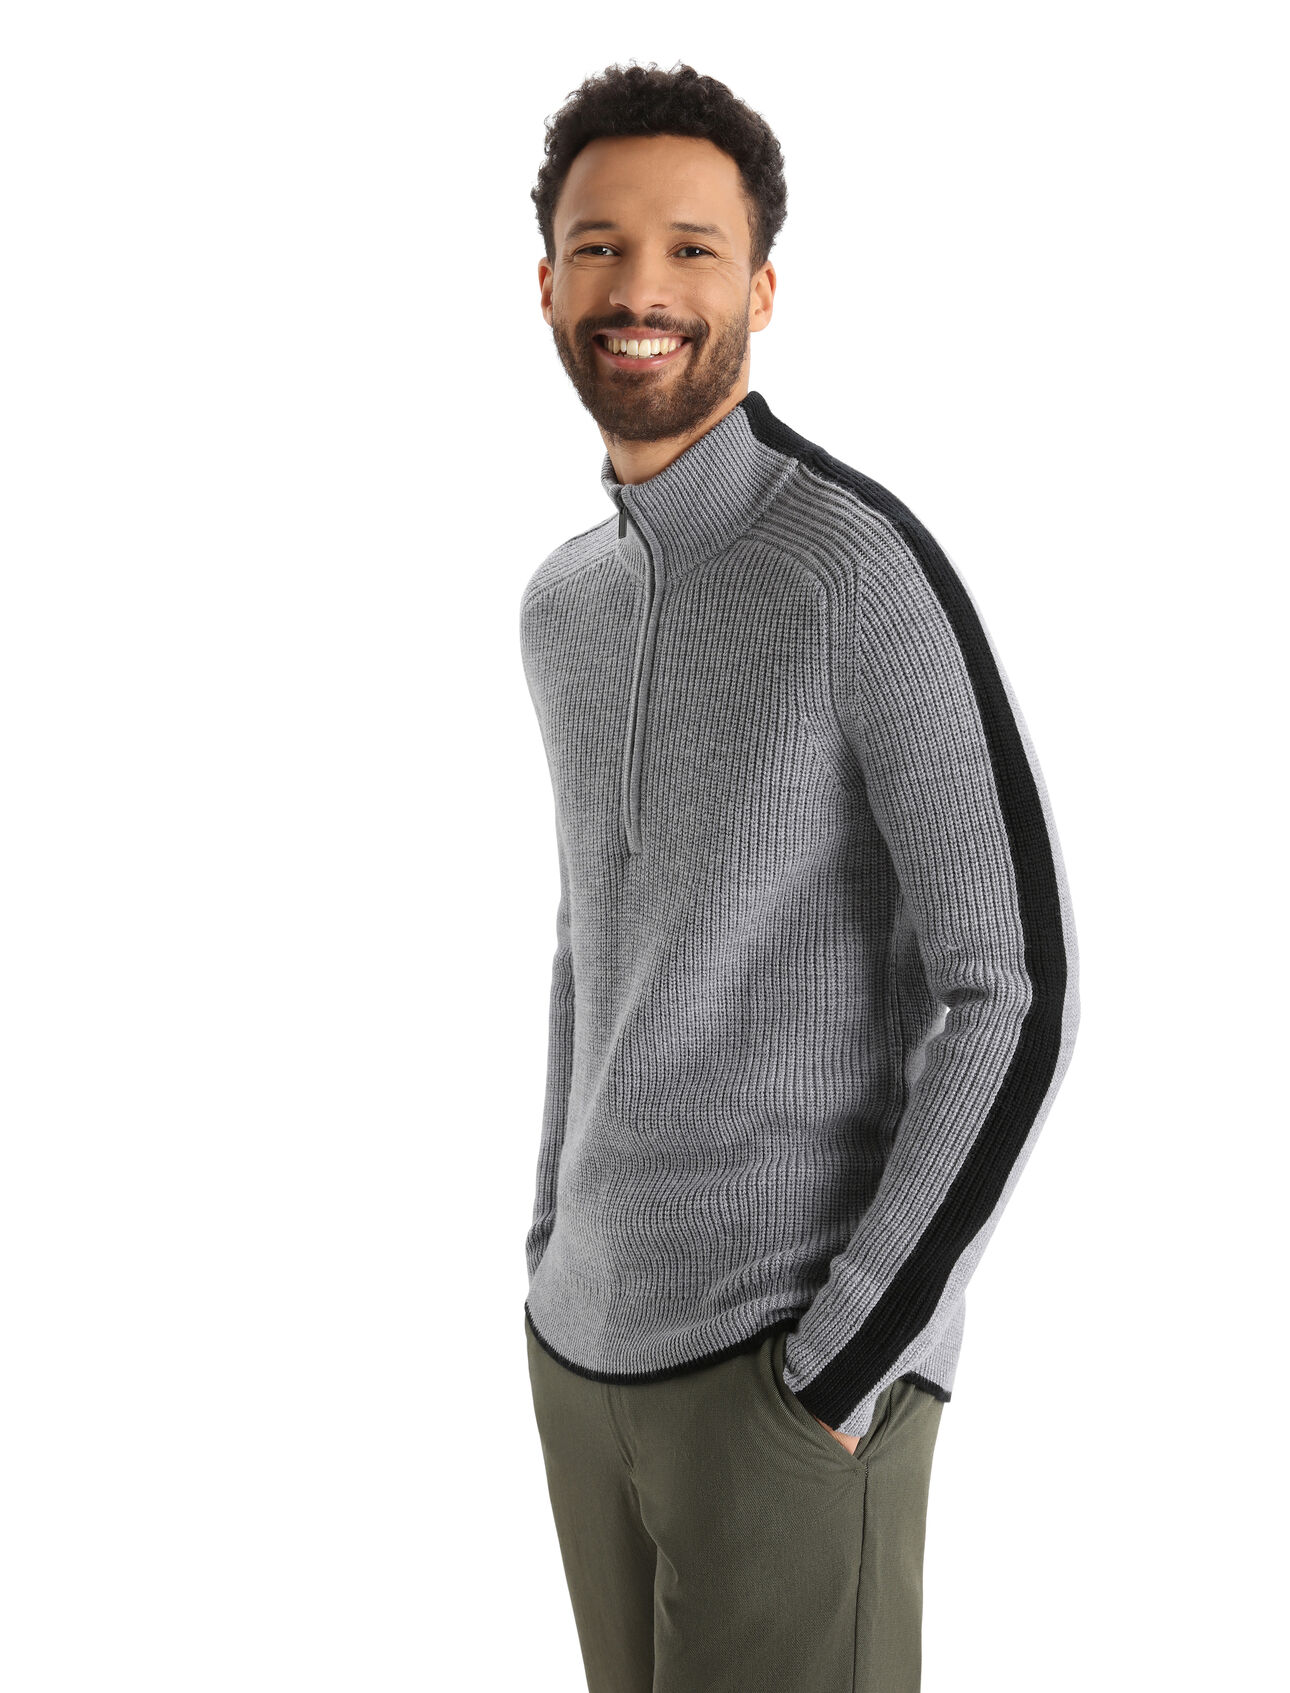 Mens Merino Lodge Long Sleeve Half Zip Sweater Inspired by our original half-zip merino pullover and reimagined with a warm, chunky knit and classic ski style, the Lodge Long Sleeve Half Zip Sweater is the quintessential cold-weather style piece.